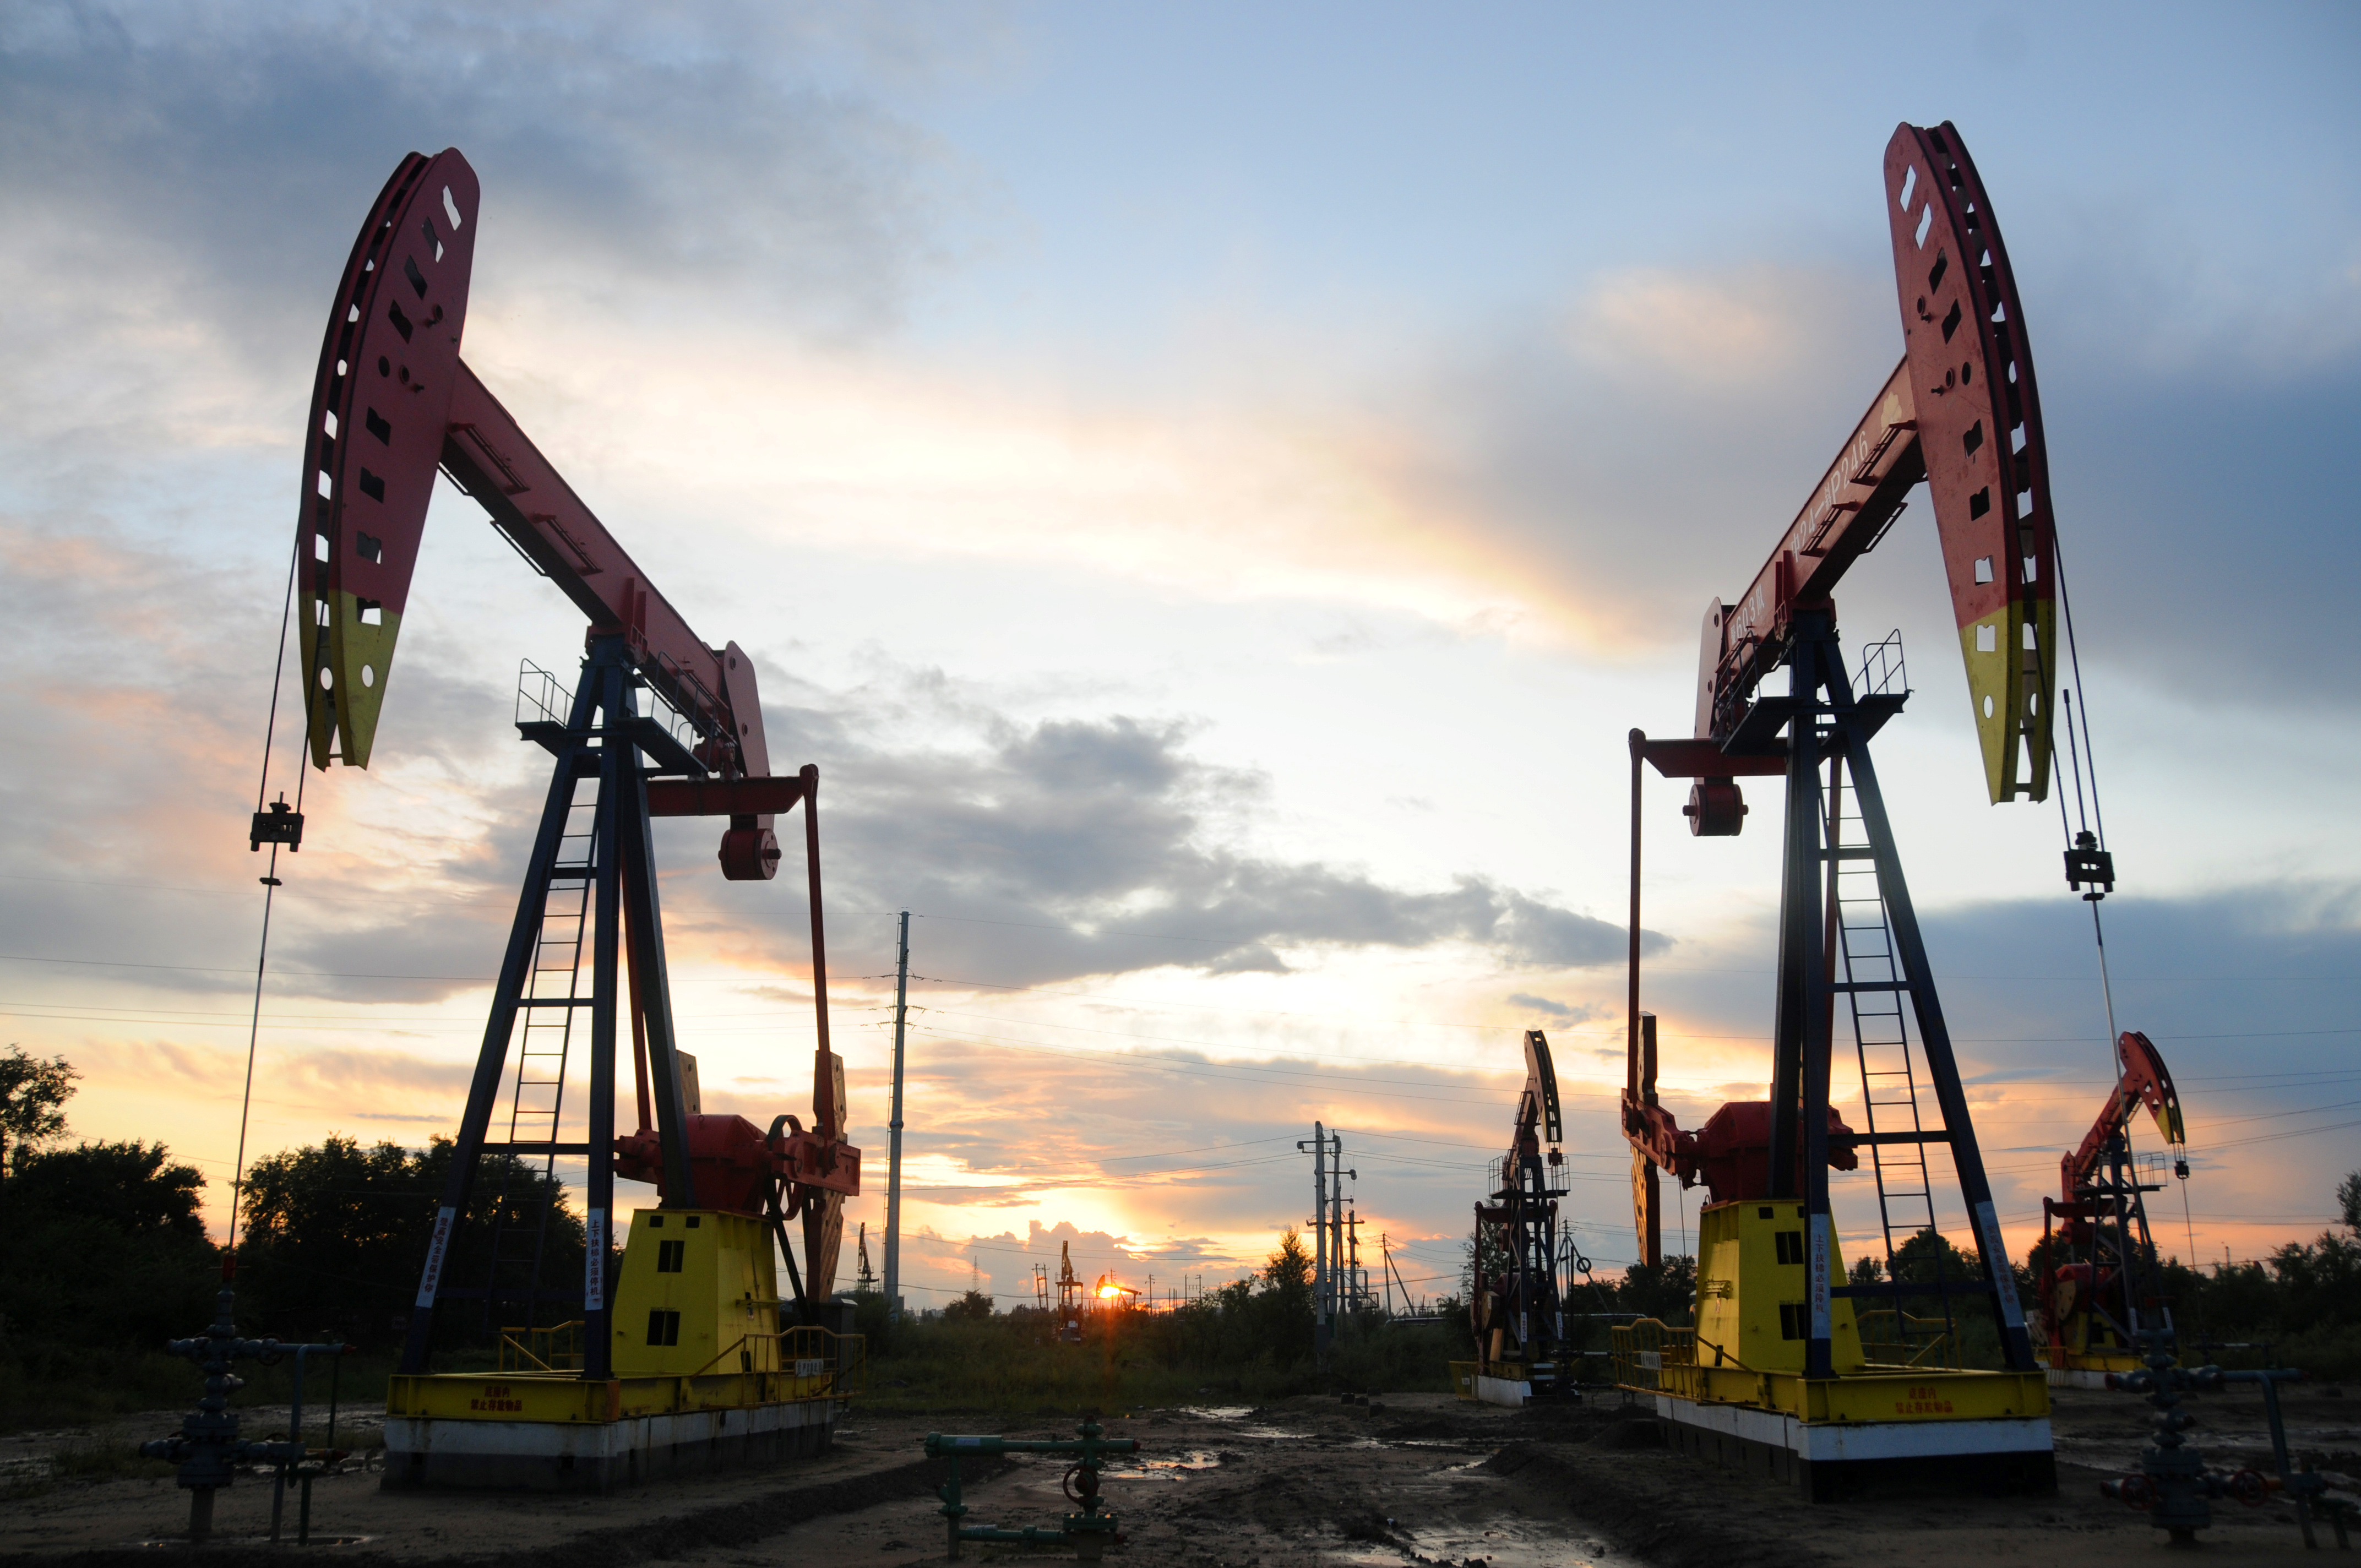 Bloomberg: Oil dives back below US$100 as recession risk spooks jumpy market